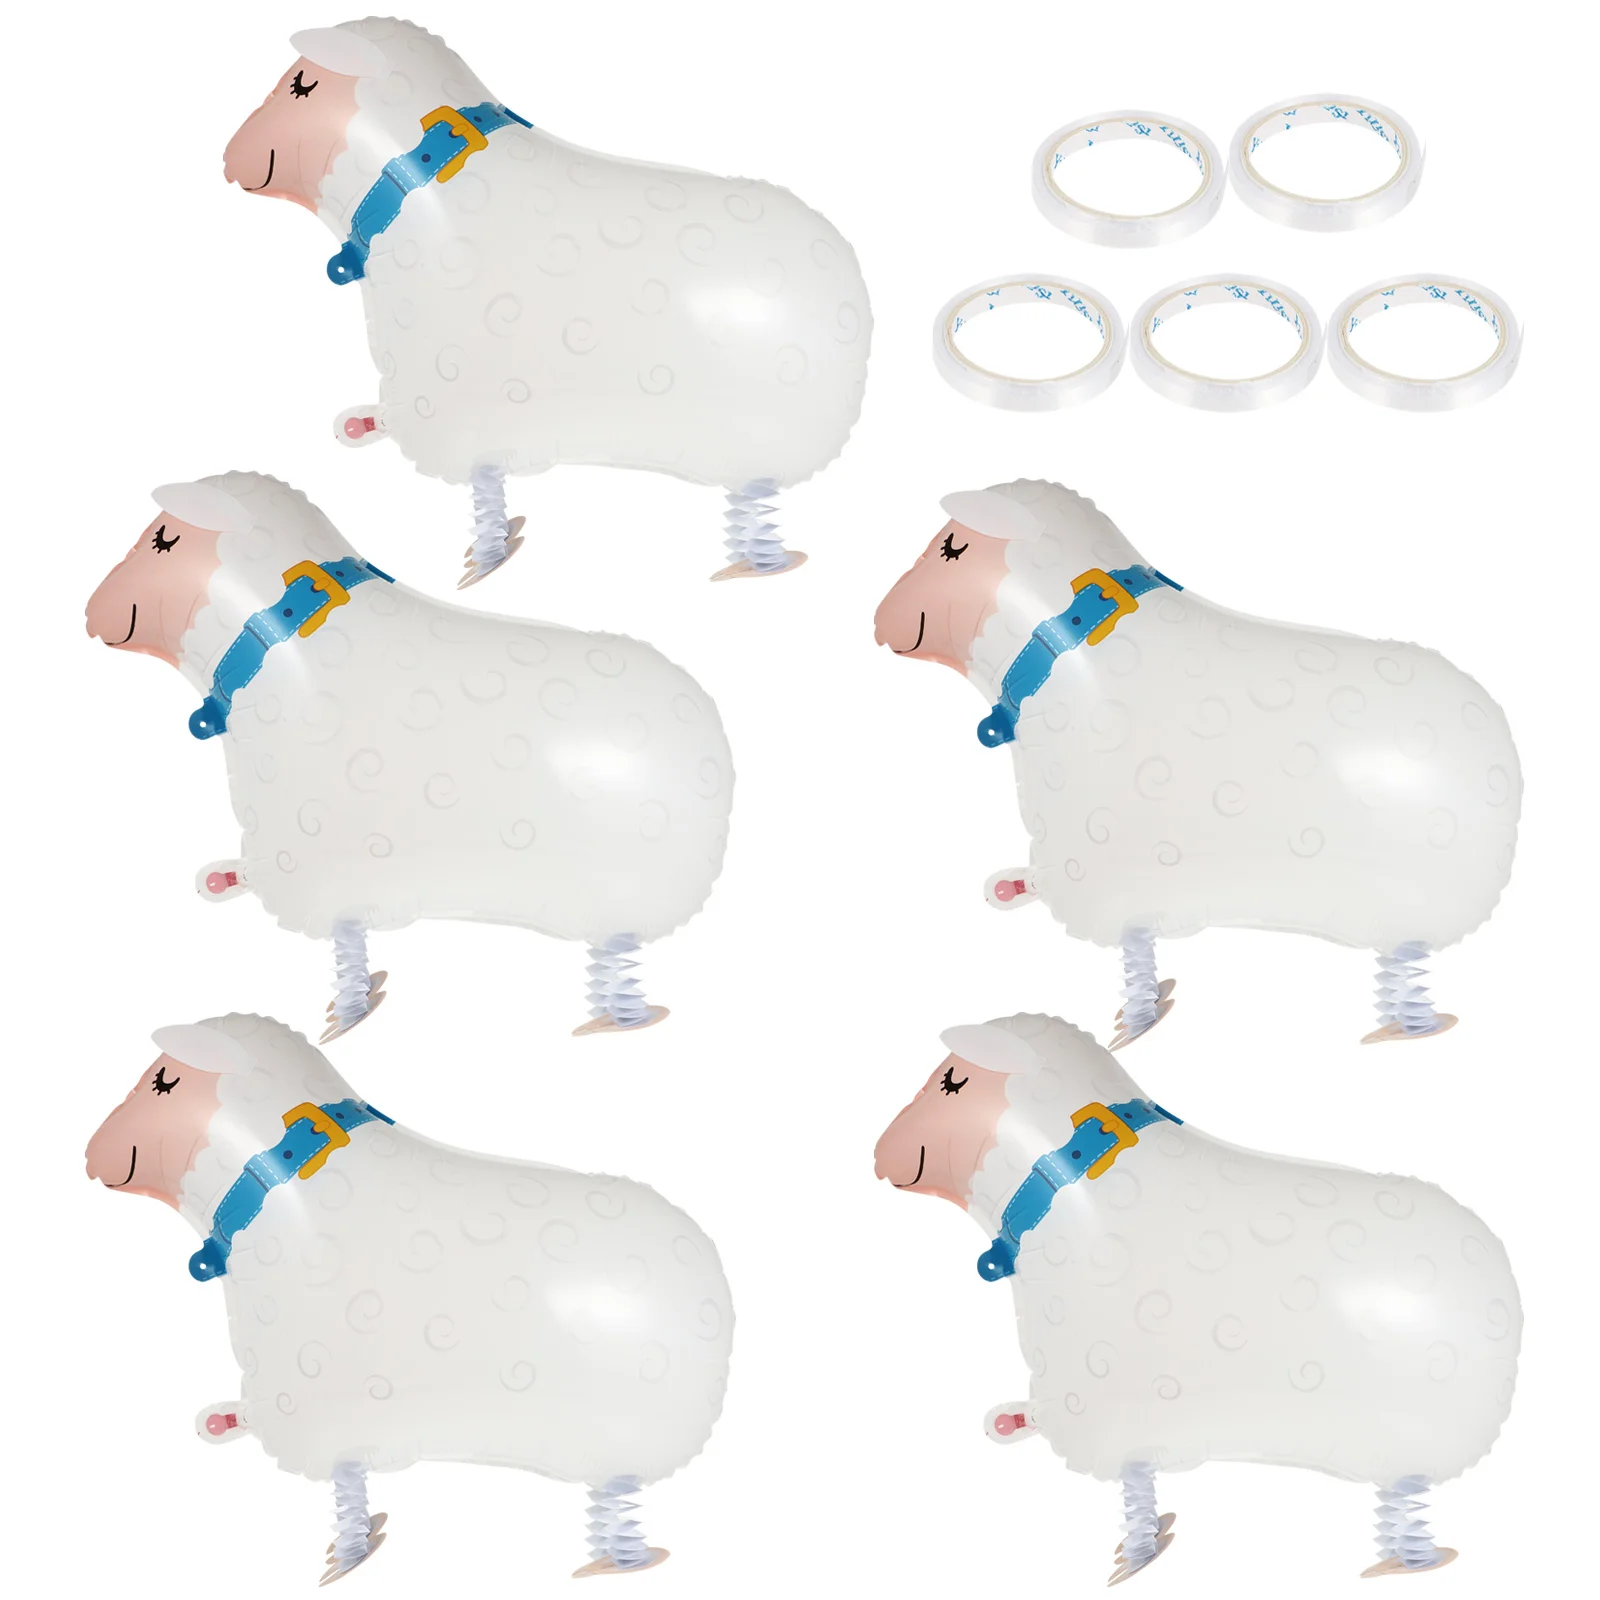 

Walking Sheep Balloons Animals Pets Aluminum Foil Pet Air Balloons Decoration Party Prop Animal Air Walkers For Kids